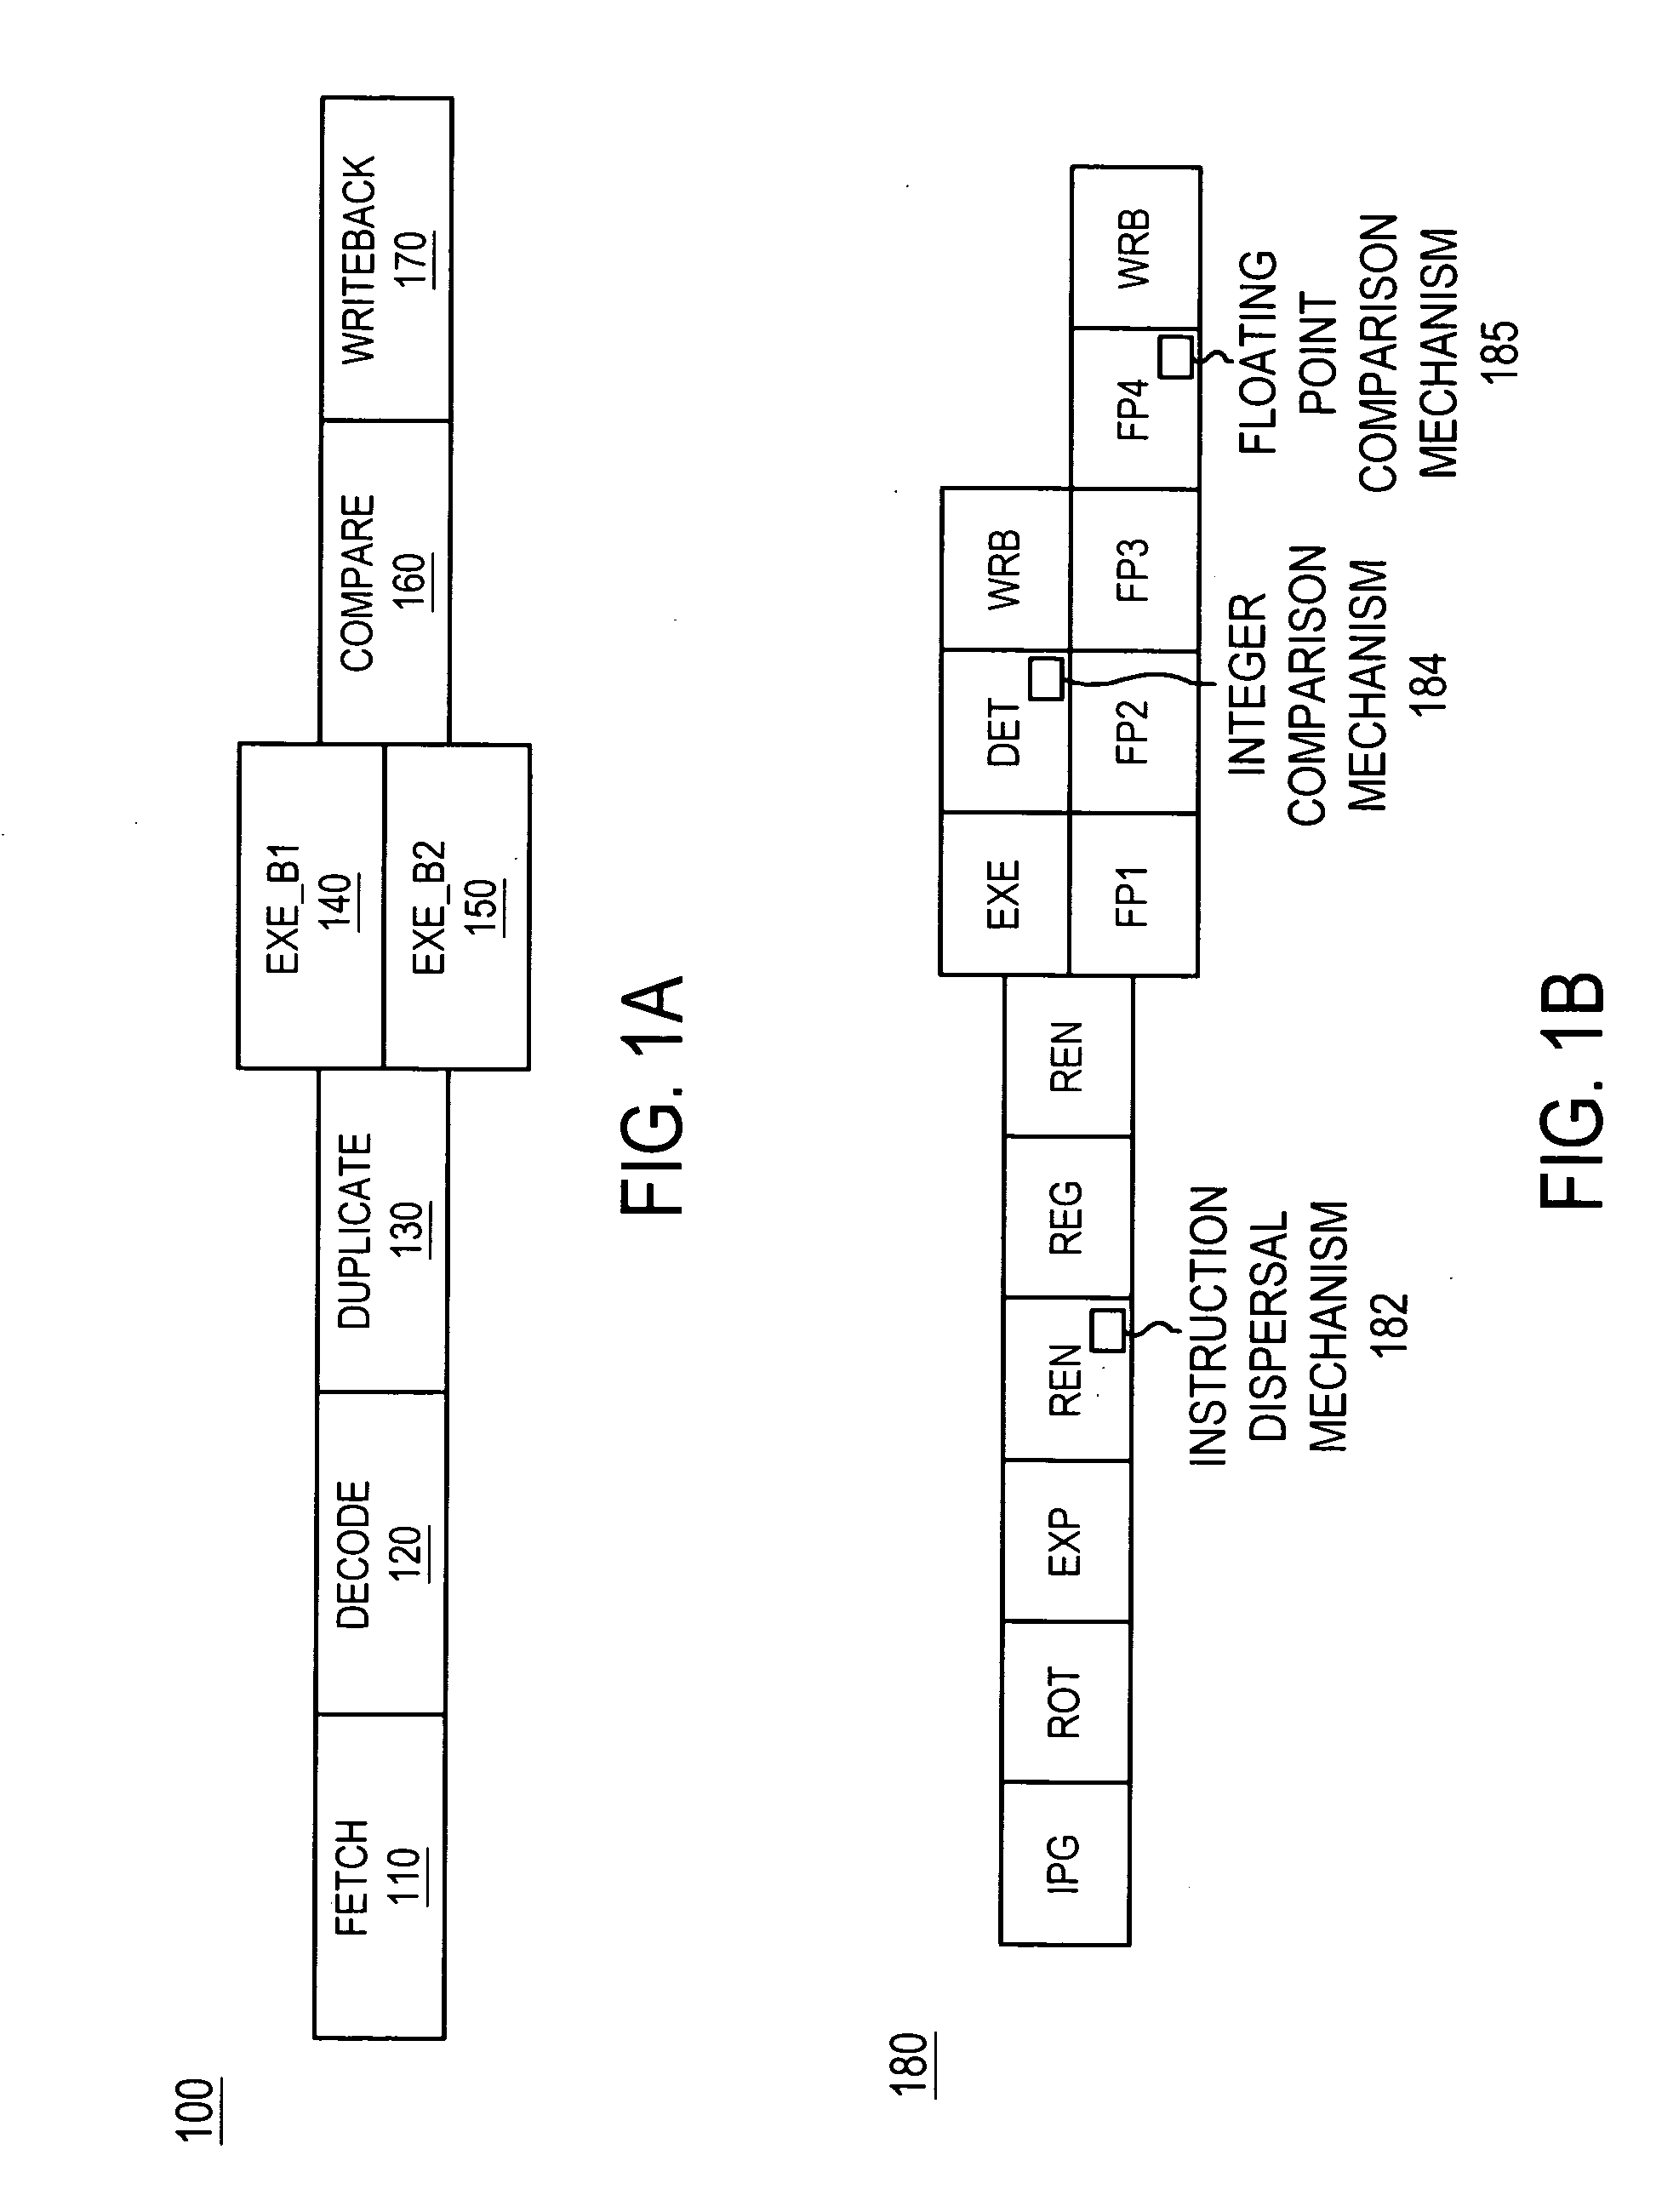 Error detection method and system for processors that employs lockstepped concurrent threads